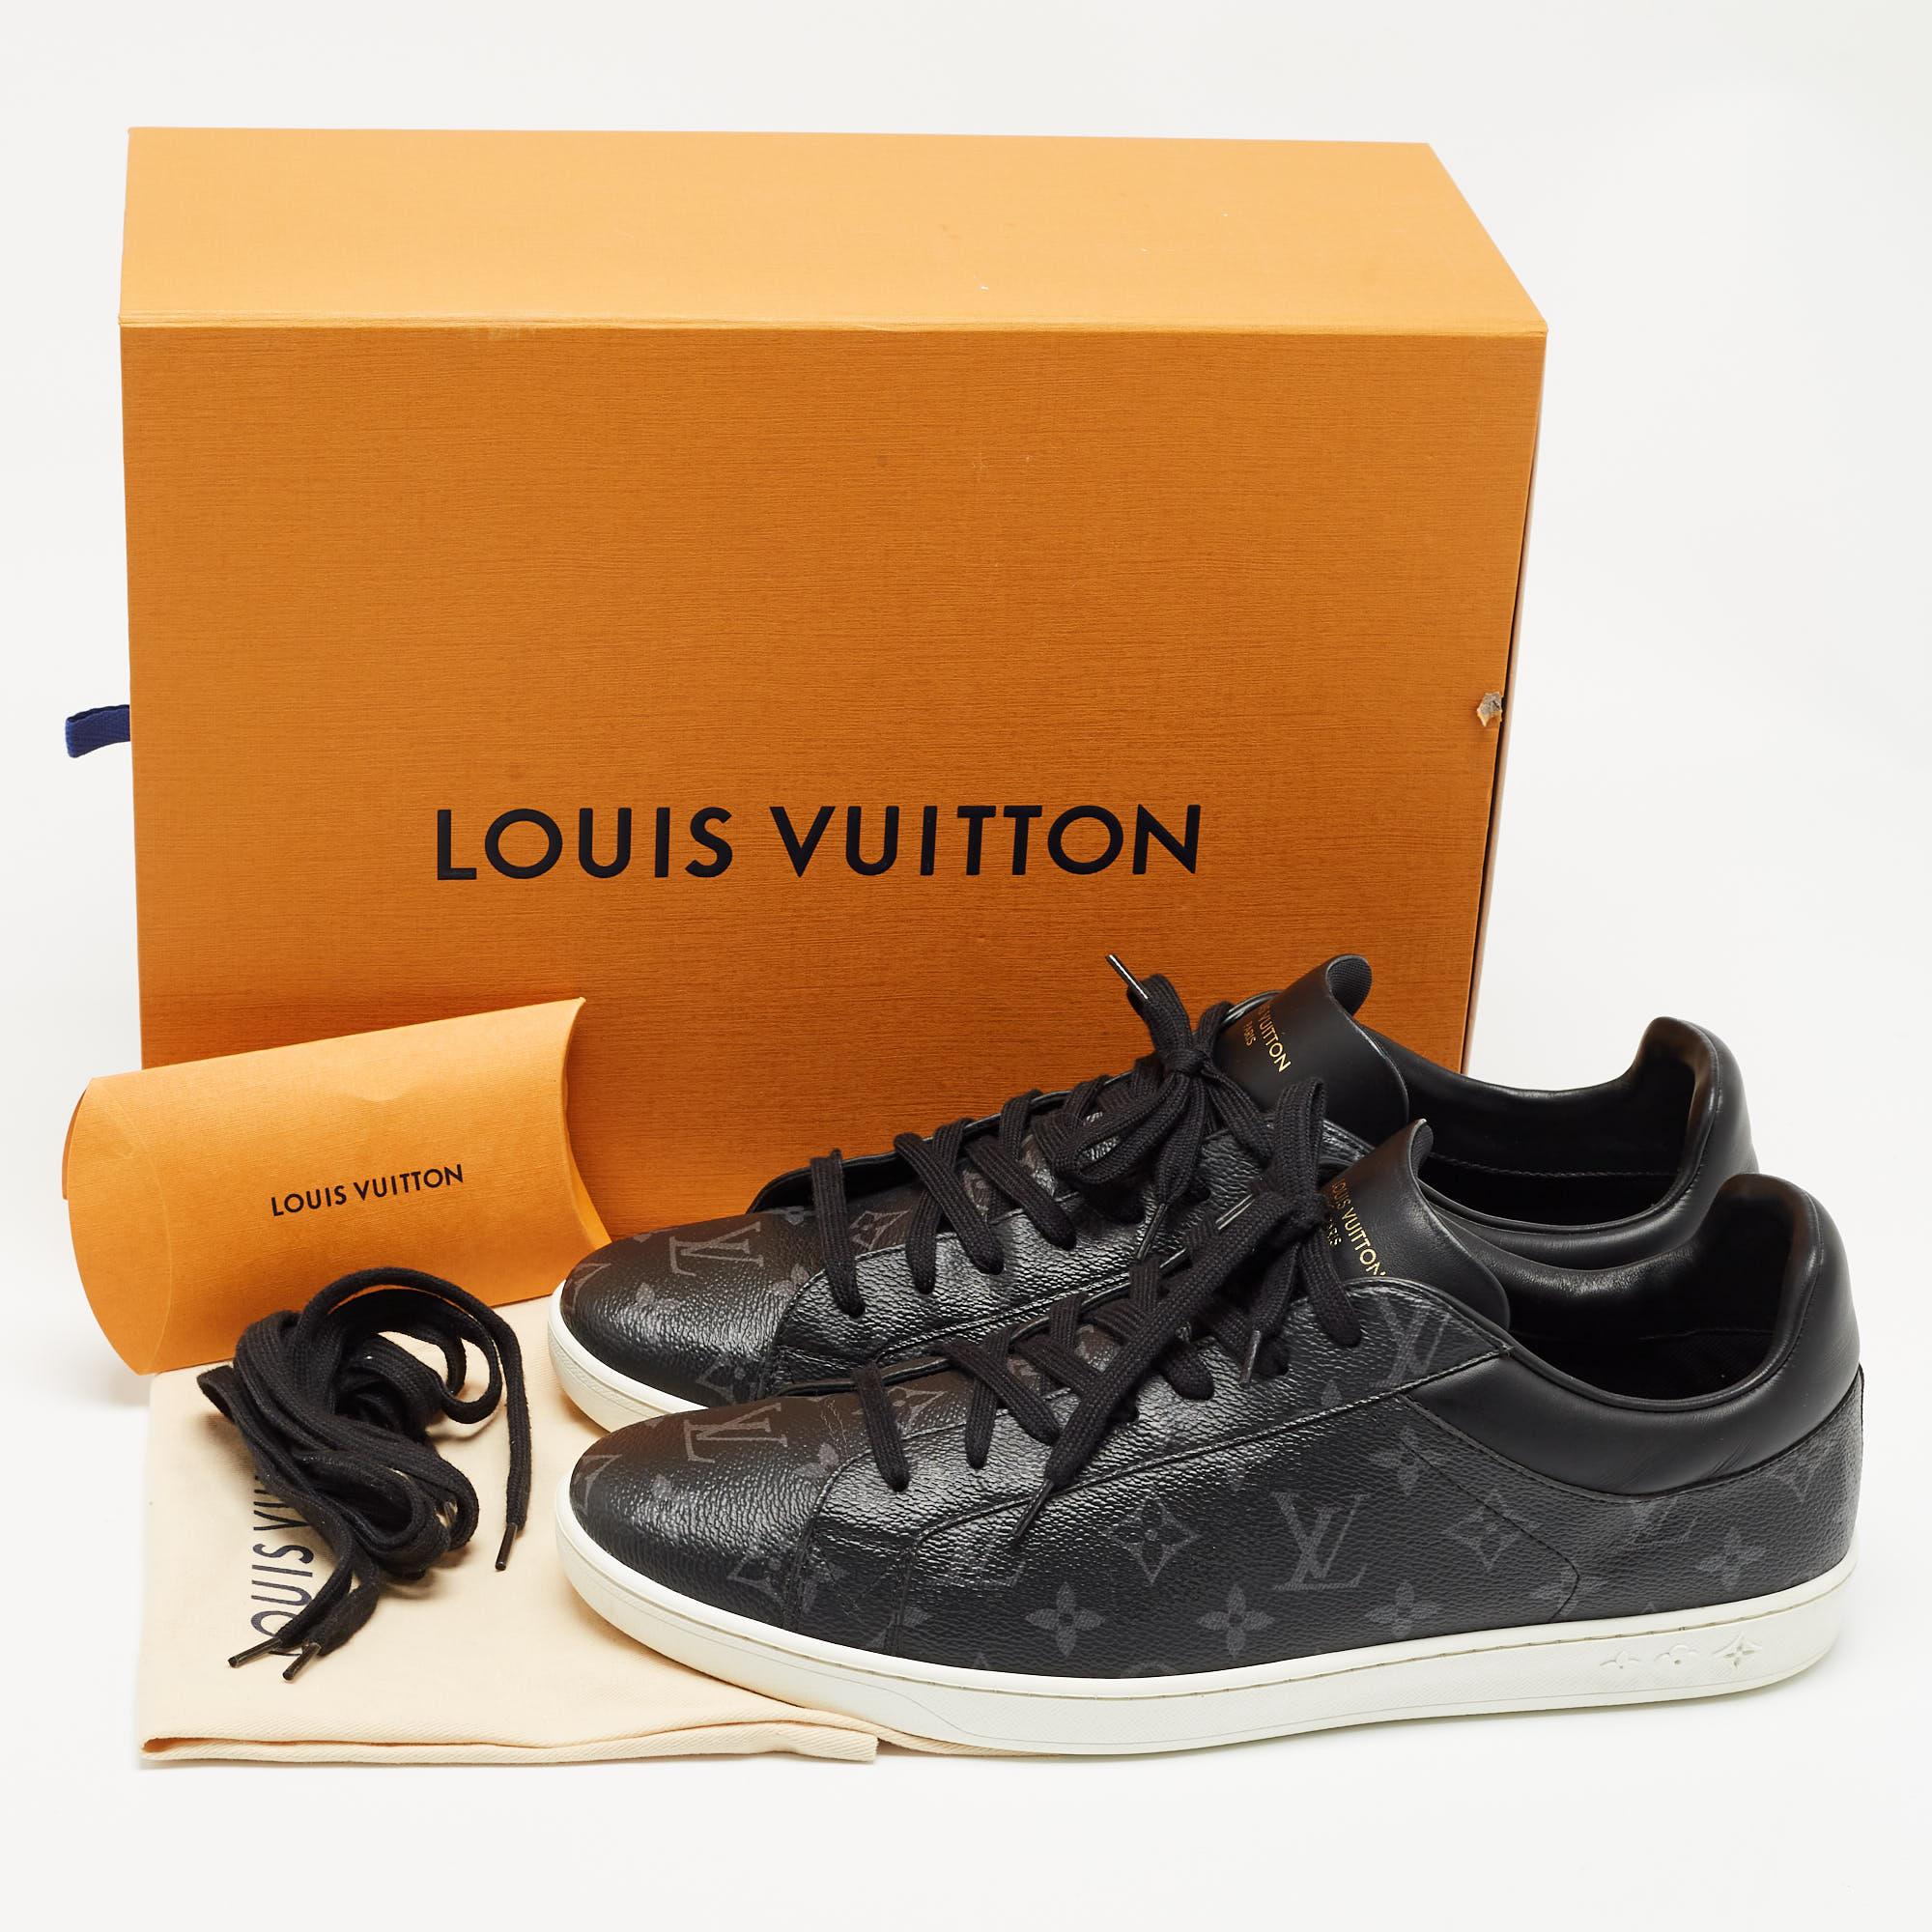 Louis Vuitton Monogram Eclipse Luxembourg Sneakers Size 46 3